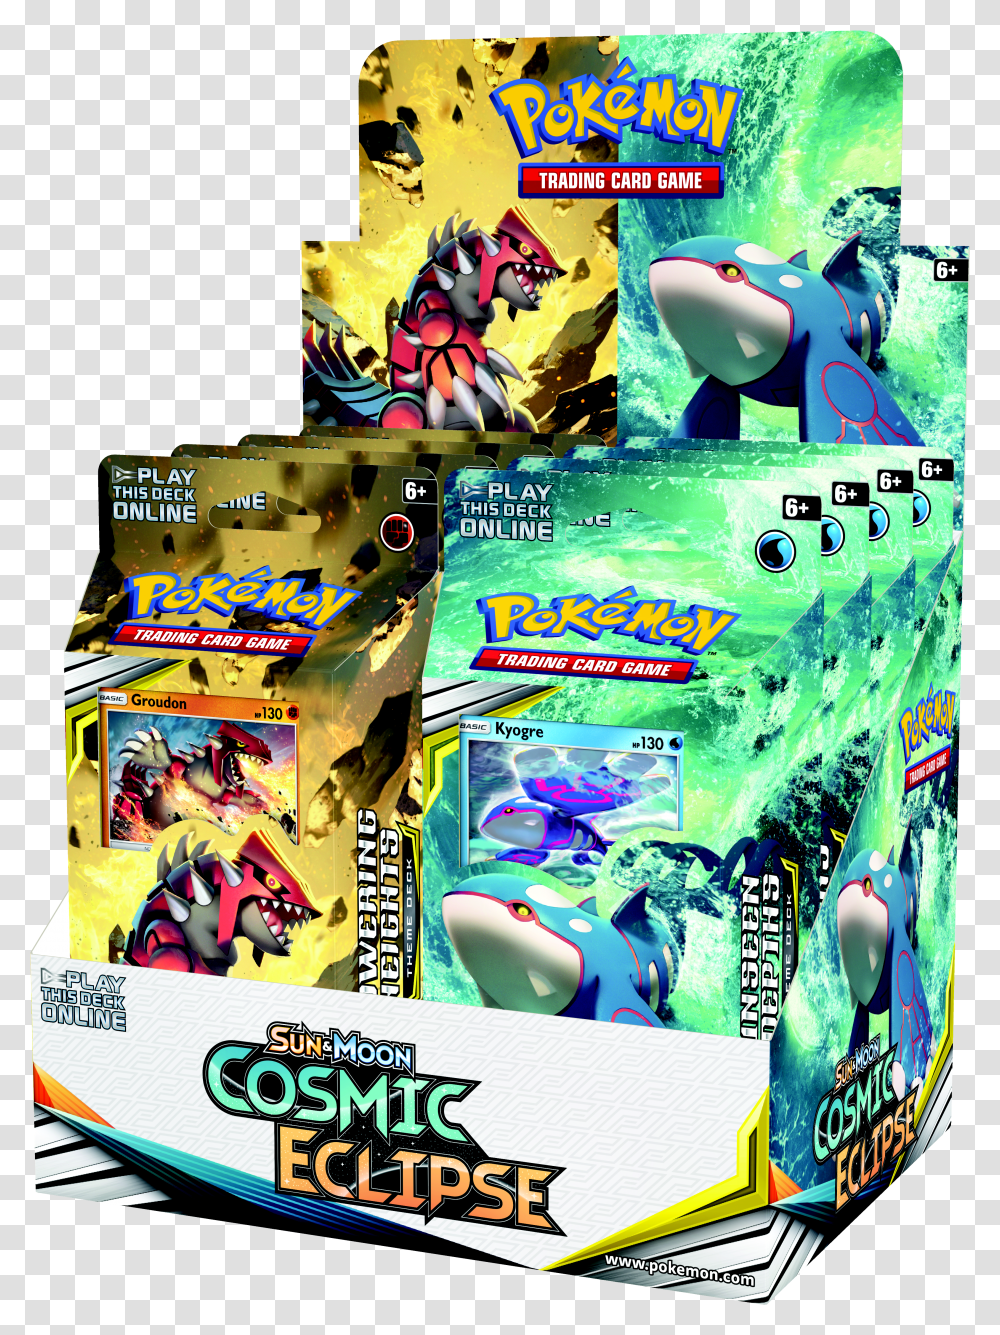 Pokemon Trading Card Game Sun And Moon Cosmic Eclipse Theme Deck Assortment Gamestop Groudon Transparent Png